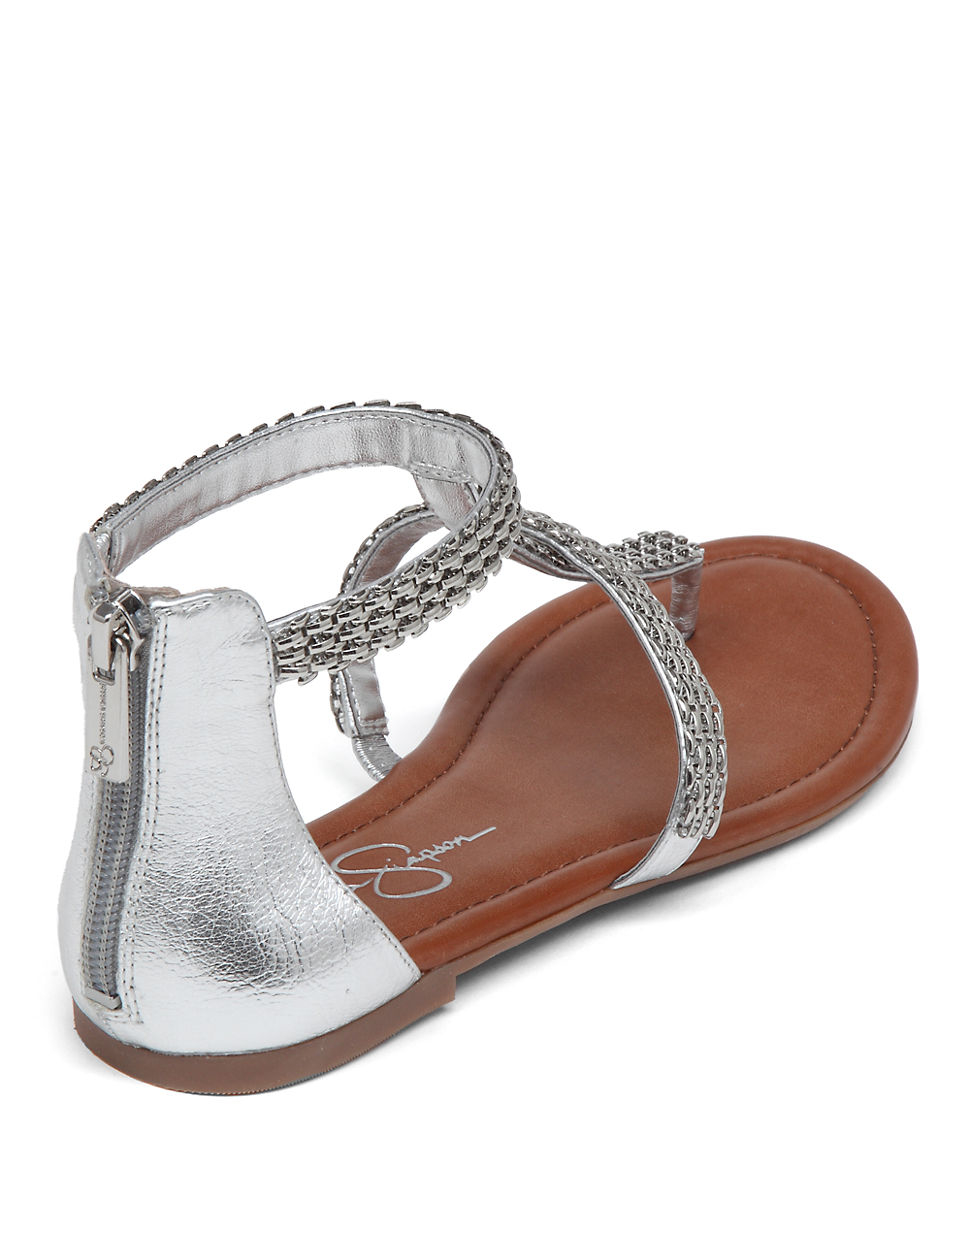 Jessica simpson Ravenna Synthetic And Metal Thong Sandals in Metallic ...